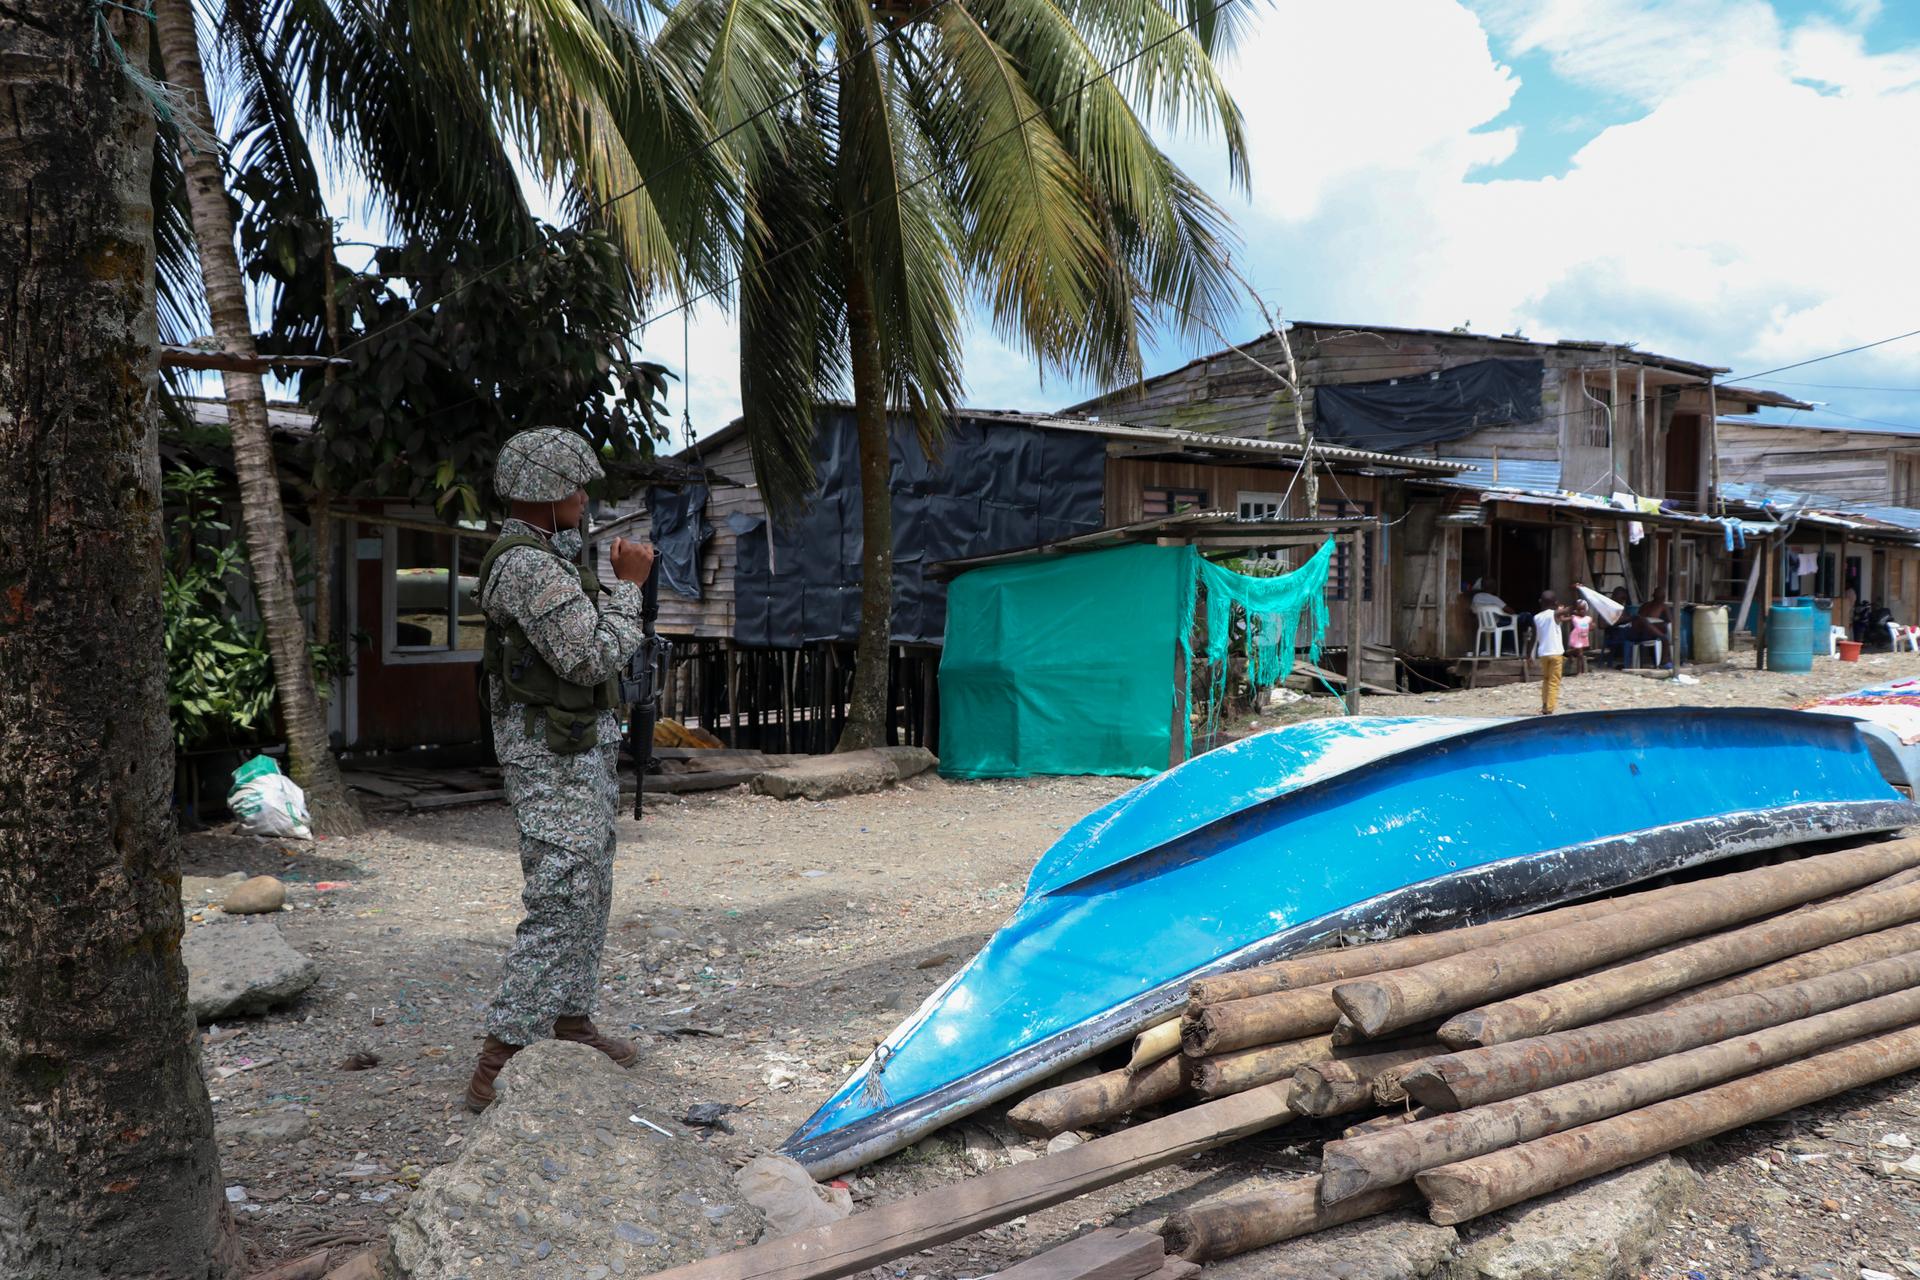 A soldier on patrol in a neighborhood with a boat on the street. 